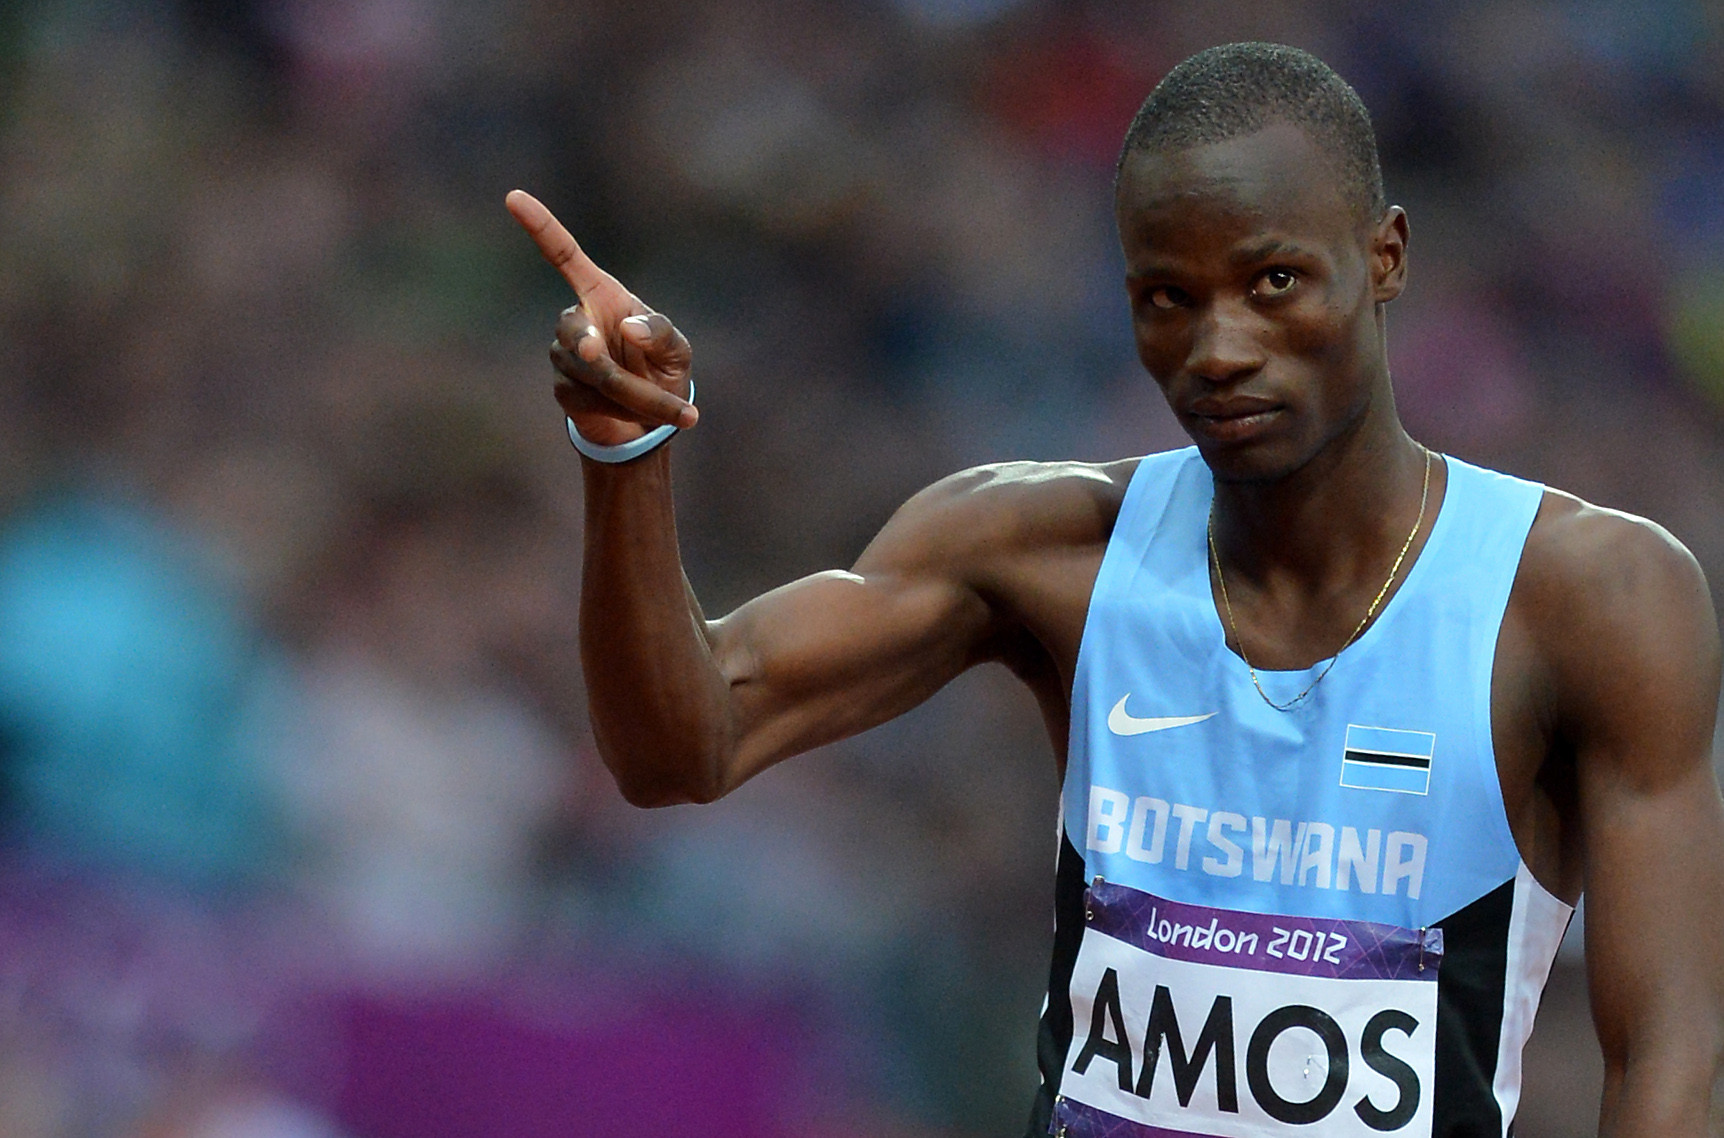 Nijel Amos won Botswana's first Olympic medal with a silver in the men's 800m at London 2012 ©Getty Images